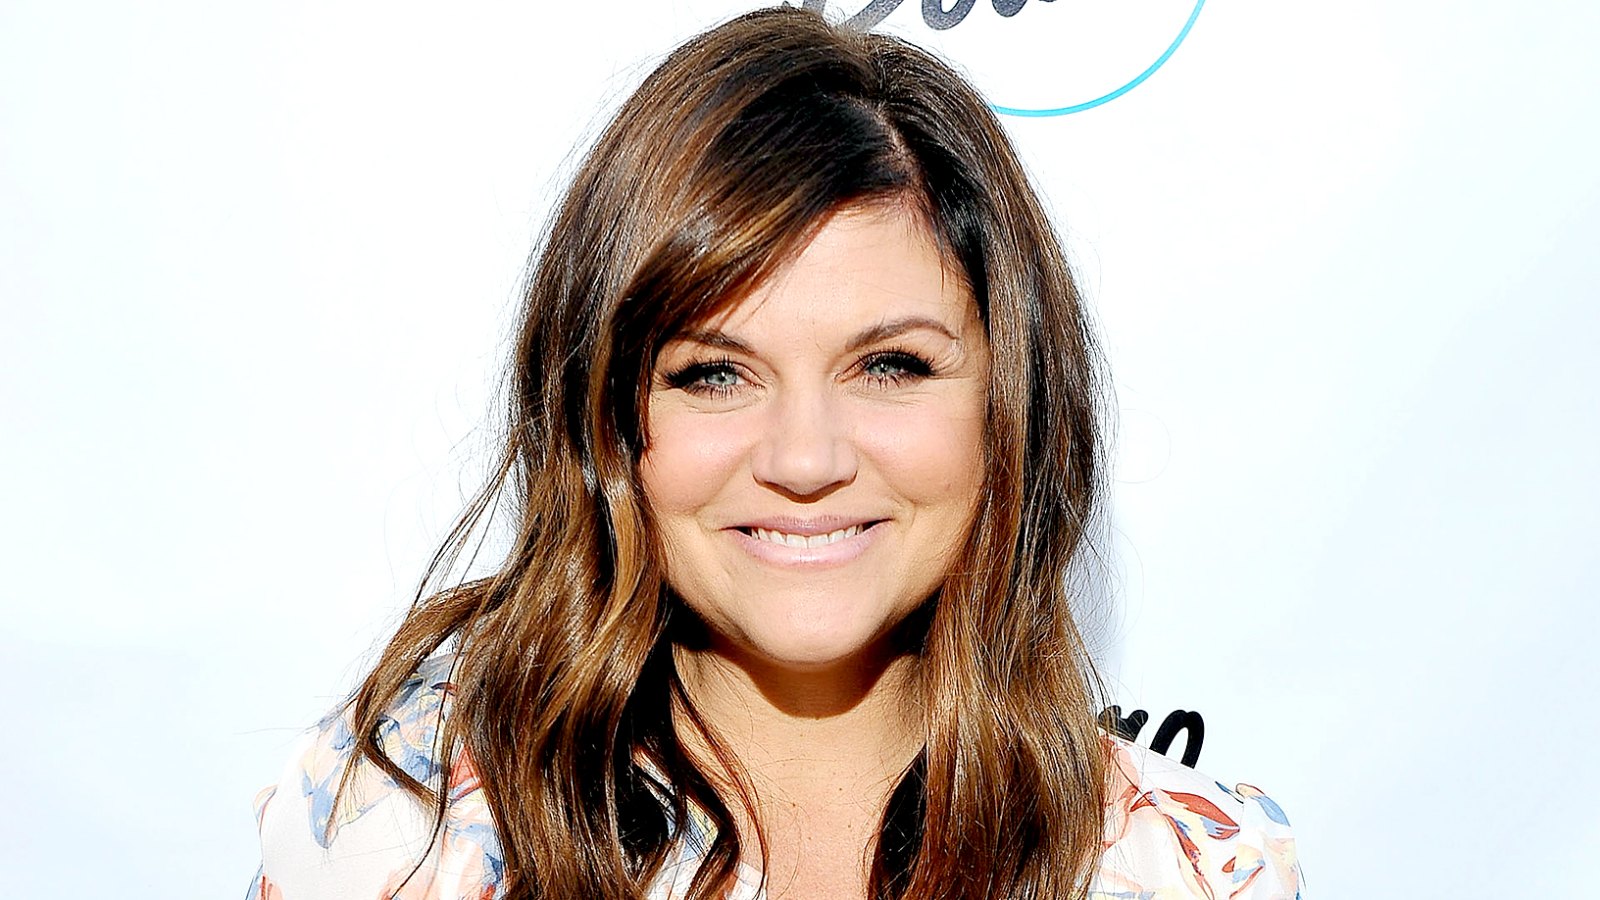 Tiffani Thiessen hosts the Grand Opening of Bowlero on March 12, 2016 in Woodland Hills, California.